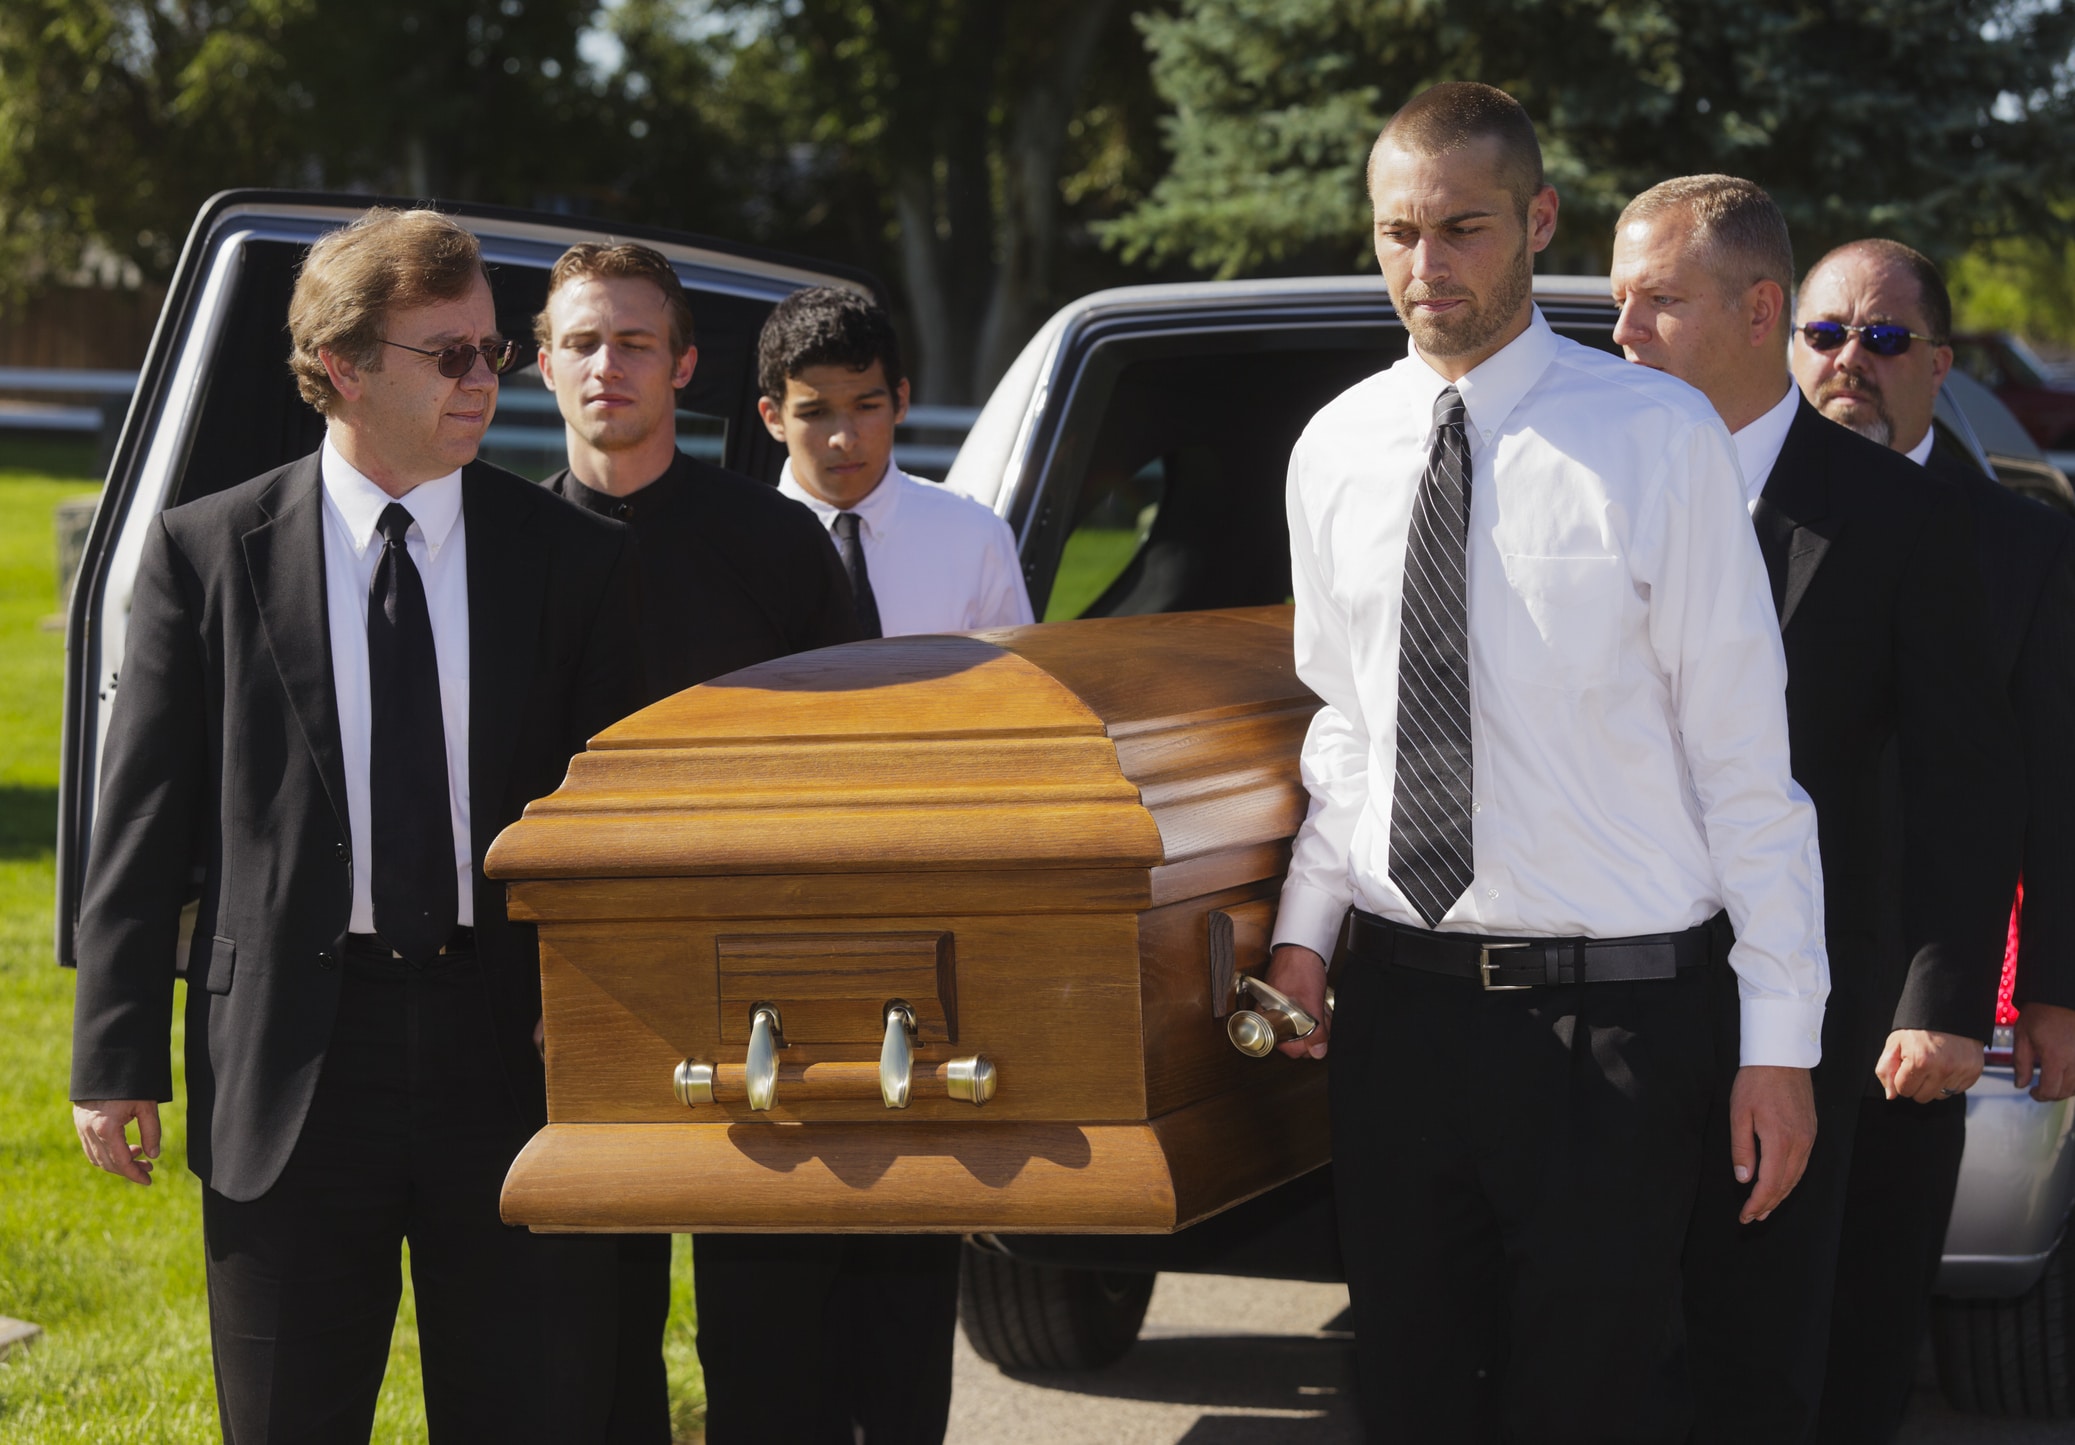 Do You Know the Protocol for Driving in a Funeral Procession?